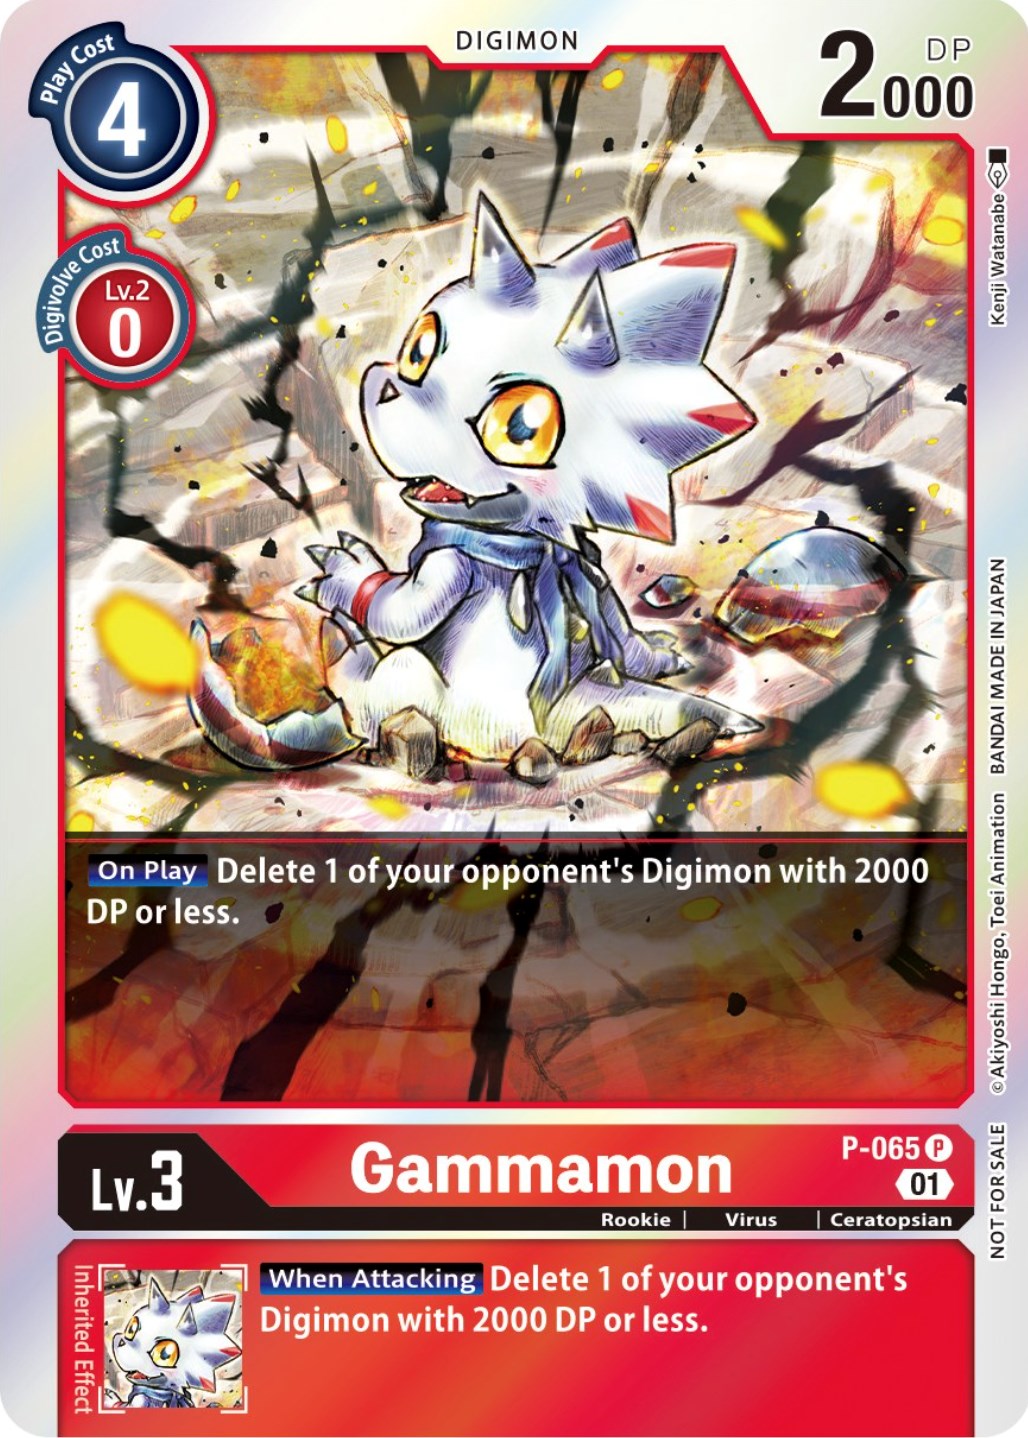 Gammamon [P-065] (ST-11 Special Entry Pack) [Promotional Cards] | Shuffle n Cut Hobbies & Games